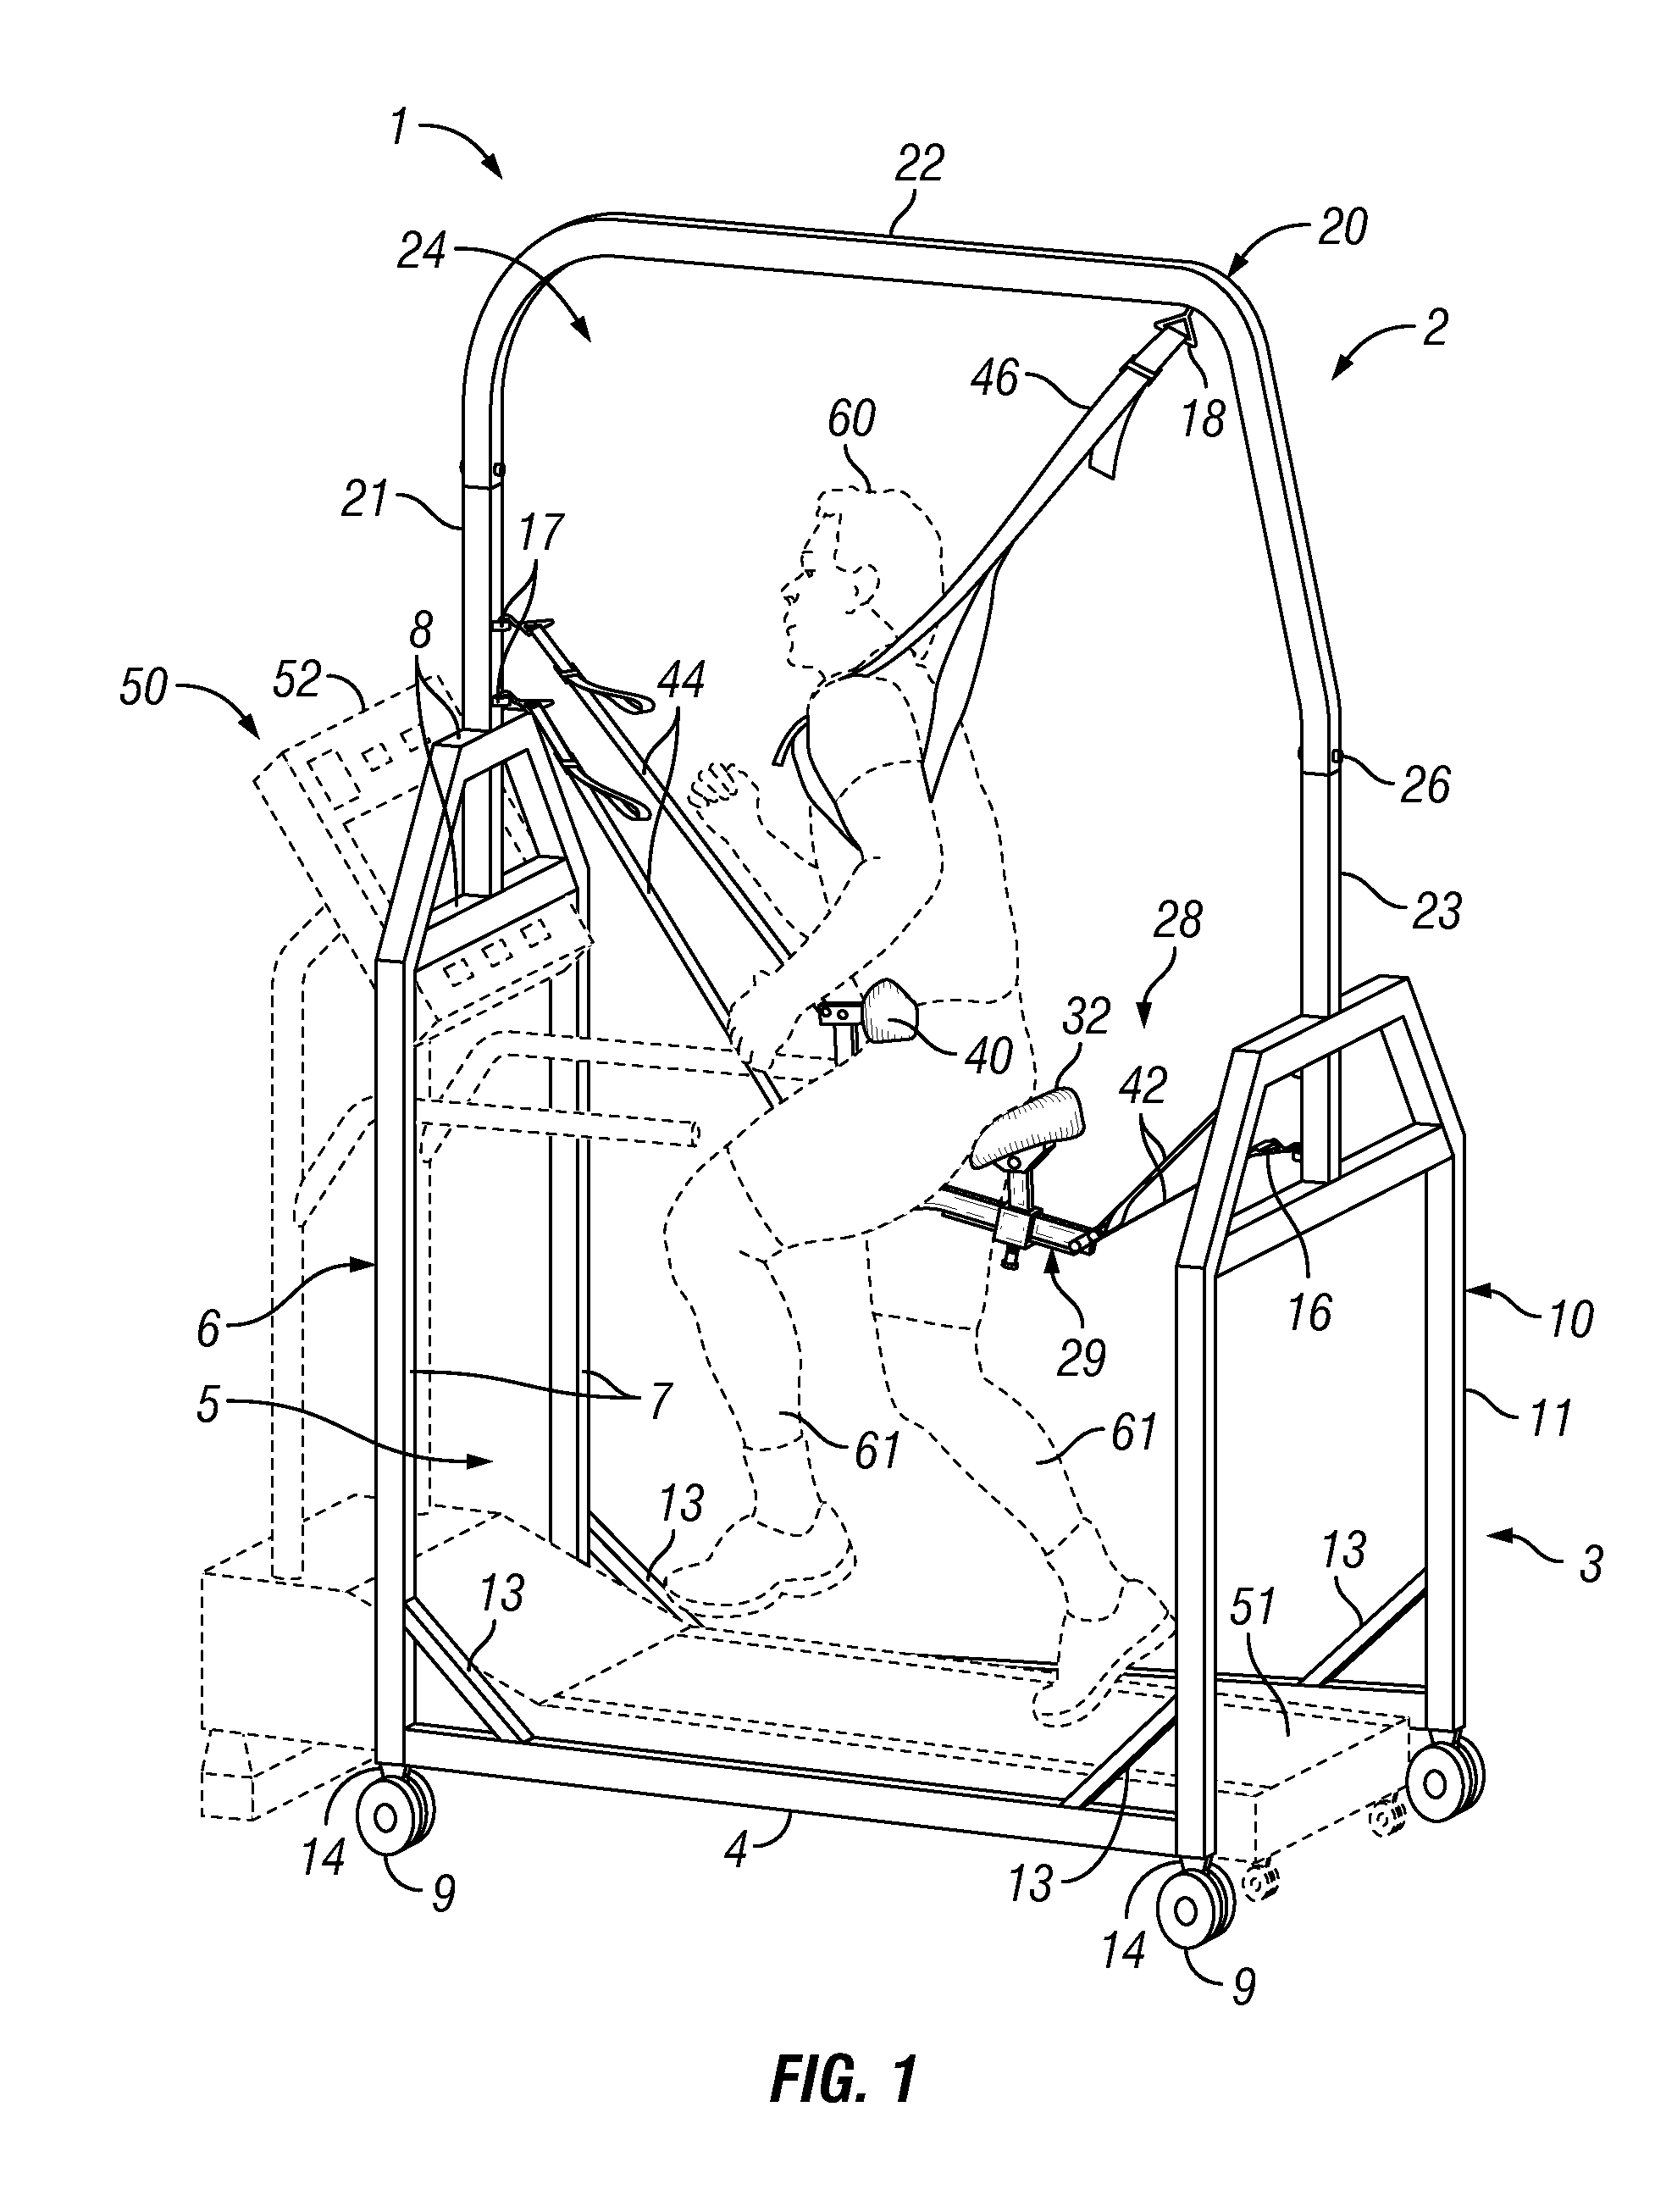 Unweighted therapy and training device